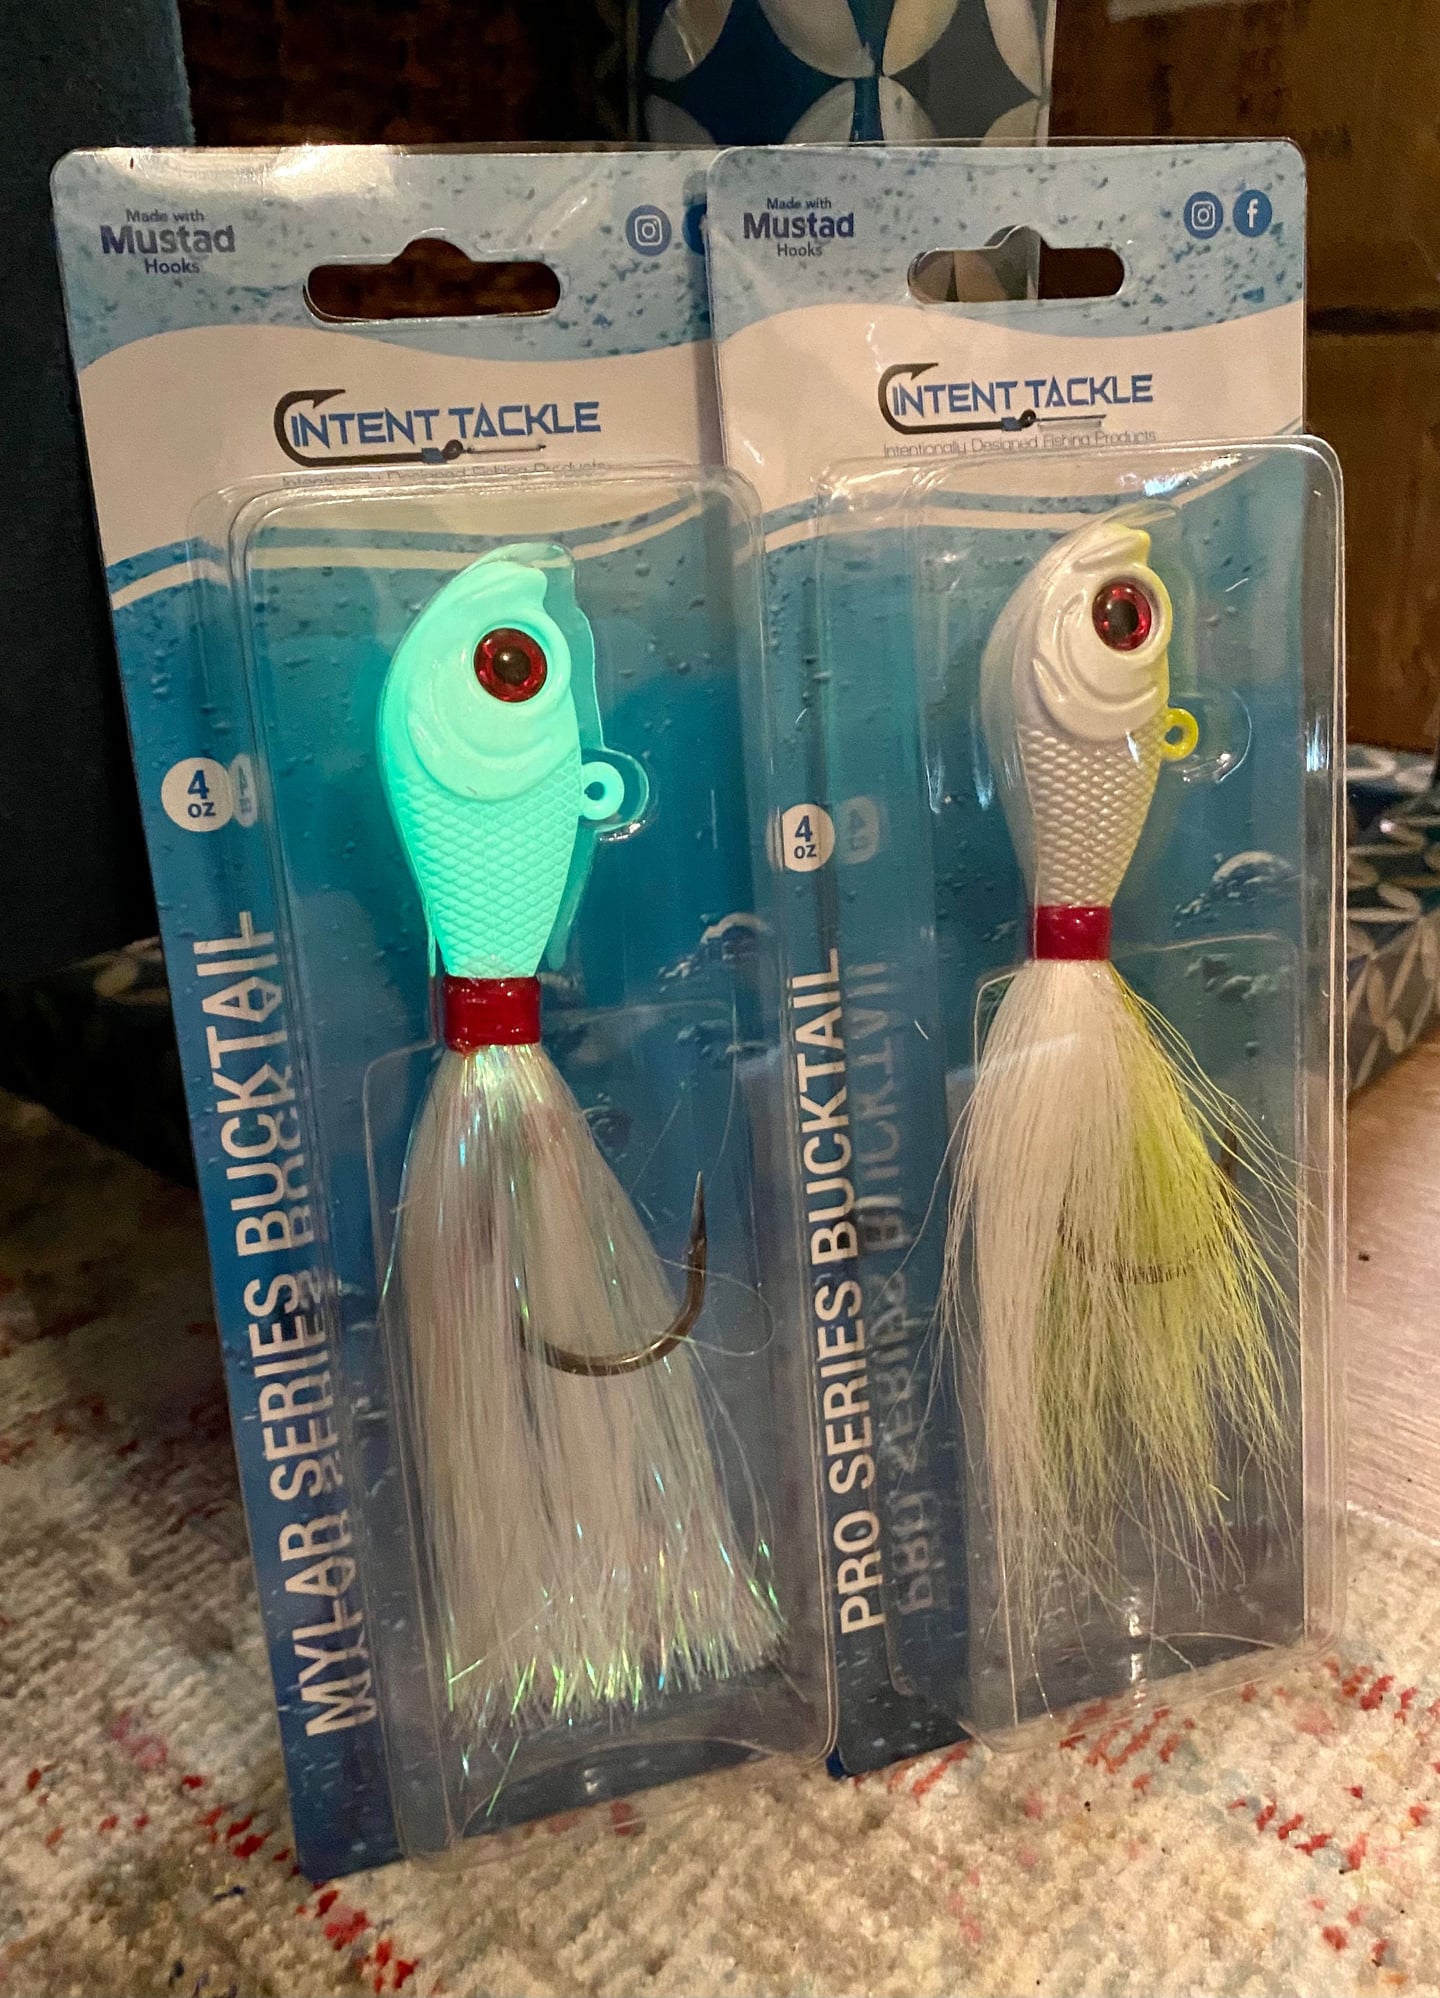 4oz Bucktails-👀👀👀 at this price - The Hull Truth - Boating and